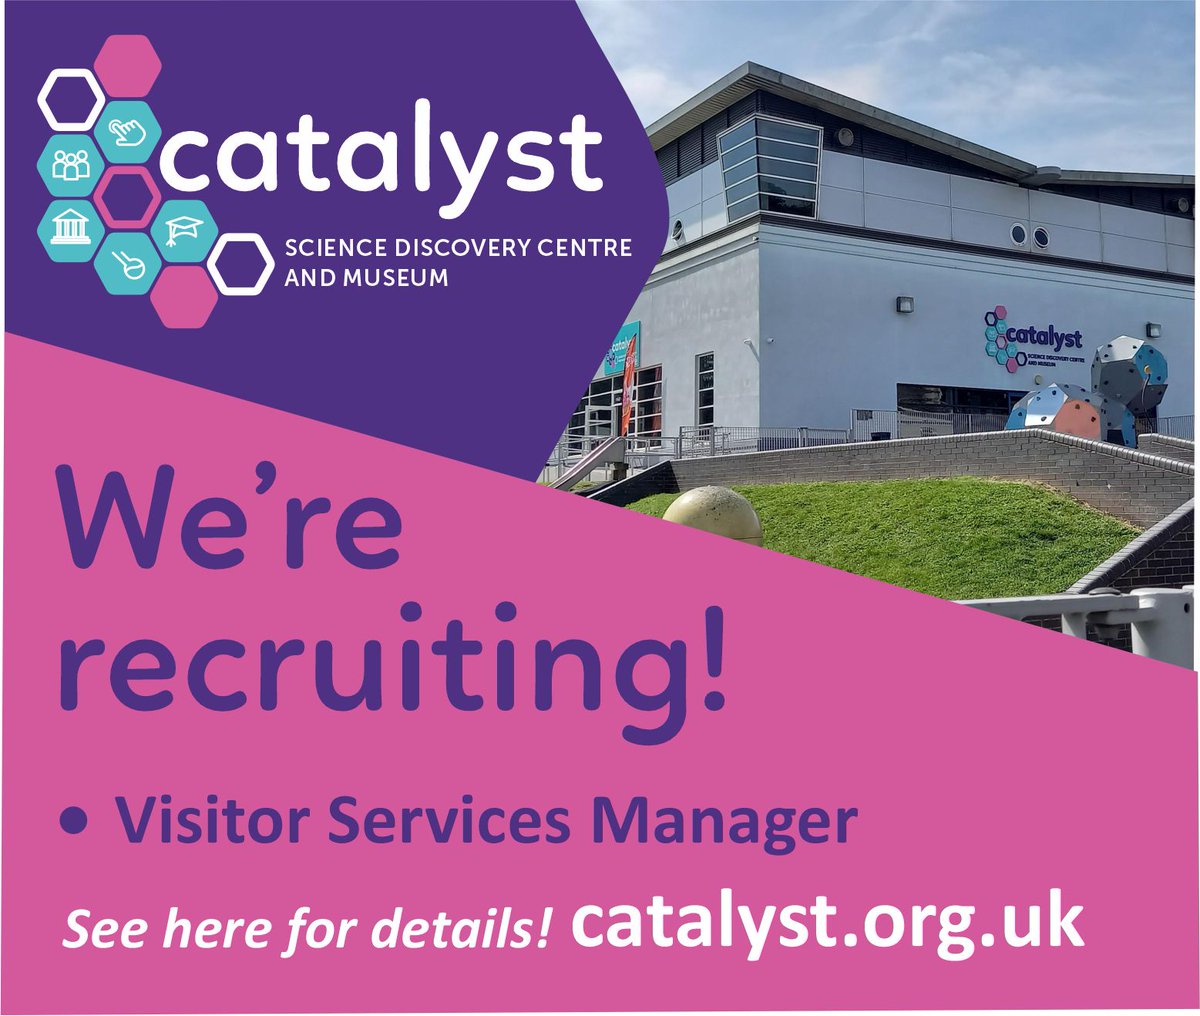 WE'RE RECRUITING for a Visitor Services Manager! These are exciting times at Catalyst as we continue to grow our visitor appeal and prepare for a major re-invention of our exhibits. If you'd like to join us on our journey, click here for more information catalyst.org.uk/wp-content/upl…